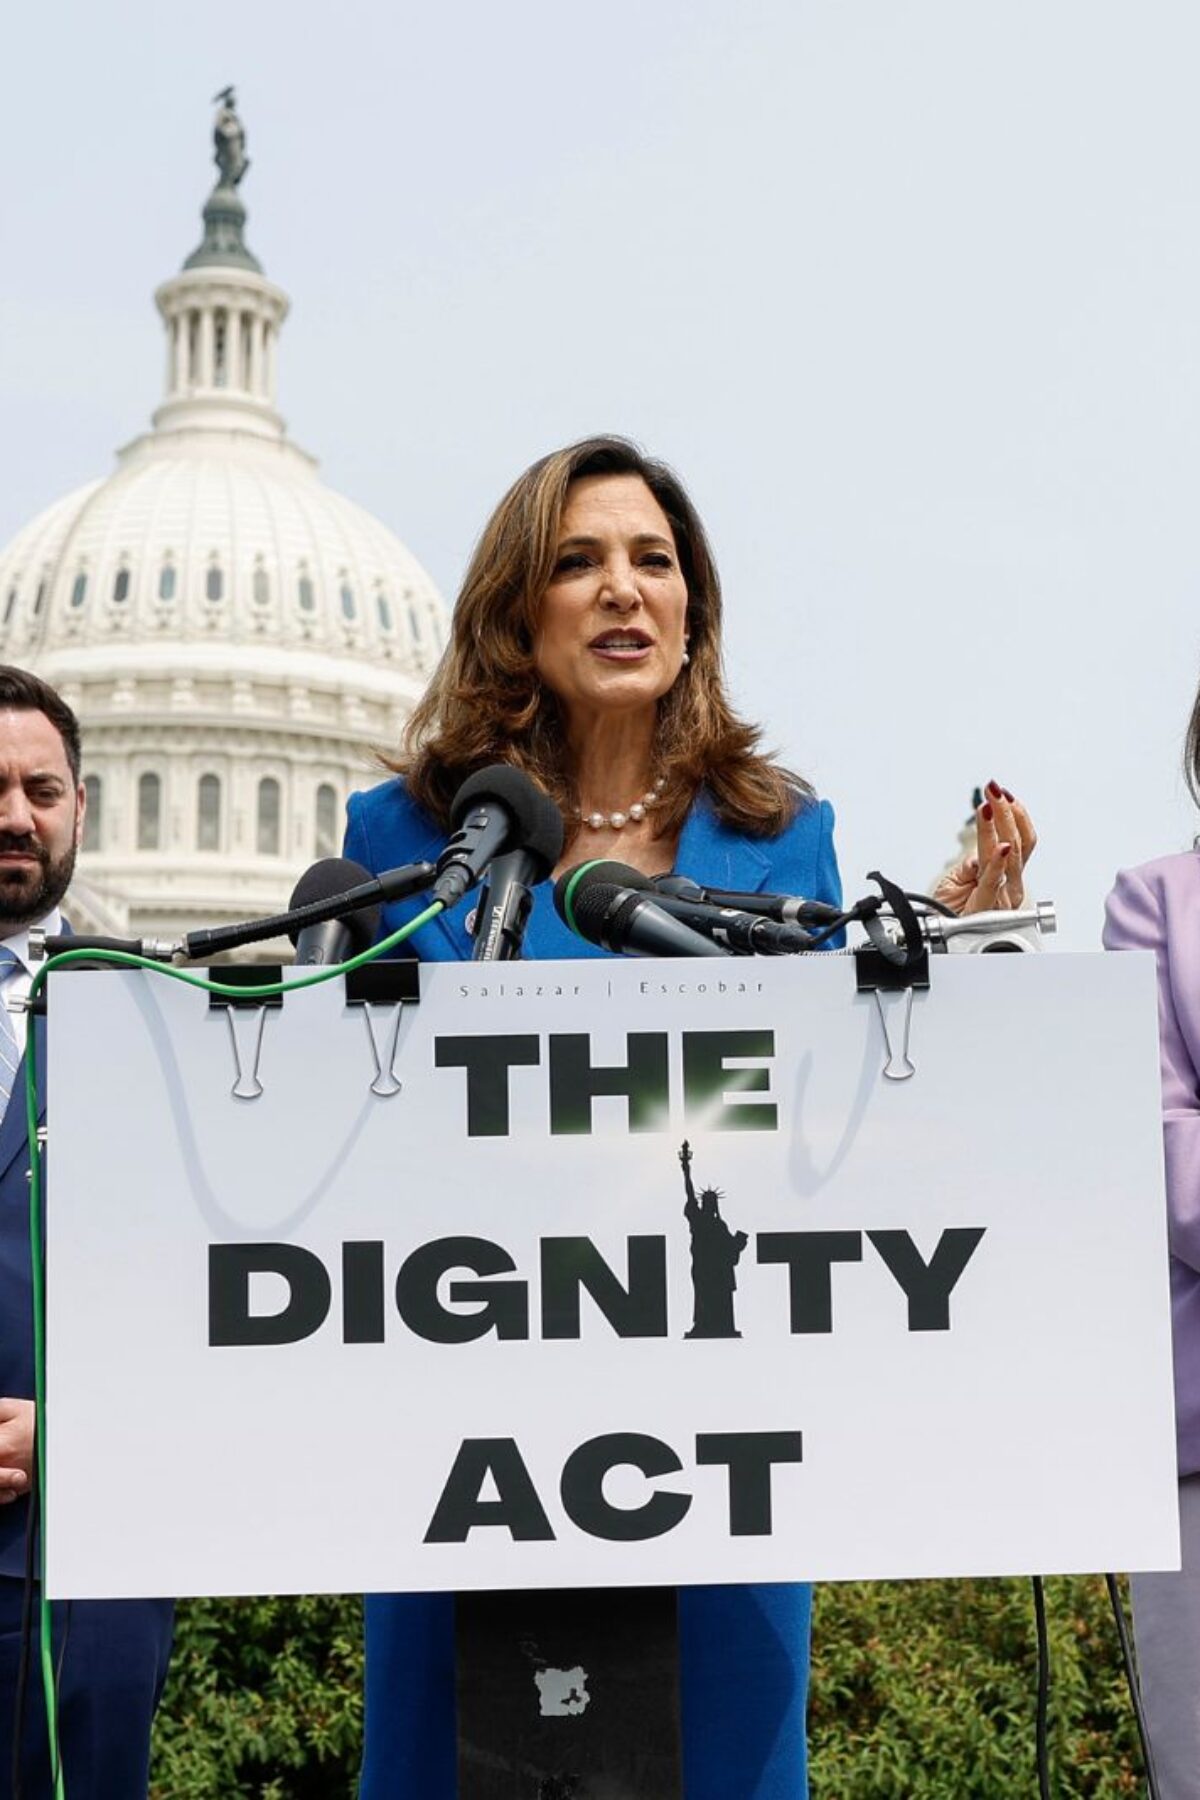 WASHINGTON, DC - MAY 23: Rep. Maria Salazar (R-FL) speaks during a press conference on immigration outside the U.S. Capitol Building on May 23, 2023 in Washington, DC. During the bipartisan news conference lawmakers introduced the “Dignity Act,” which lawmakers expect will improve the application process for U.S. citizenship as well as increase security on both the northern and southern borders. Lawmakers in attendance included Republican Delegate Jenniffer Gonzalez-Colon (R-PR), Rep Mike Lawler (R-NY), Rep. Veronica Escobar (D-TX), Rep. Kathy Manning (D-NC) and Rep. Hillary Scholten (D-MI). (Photo by Anna Moneymaker/Getty Images)